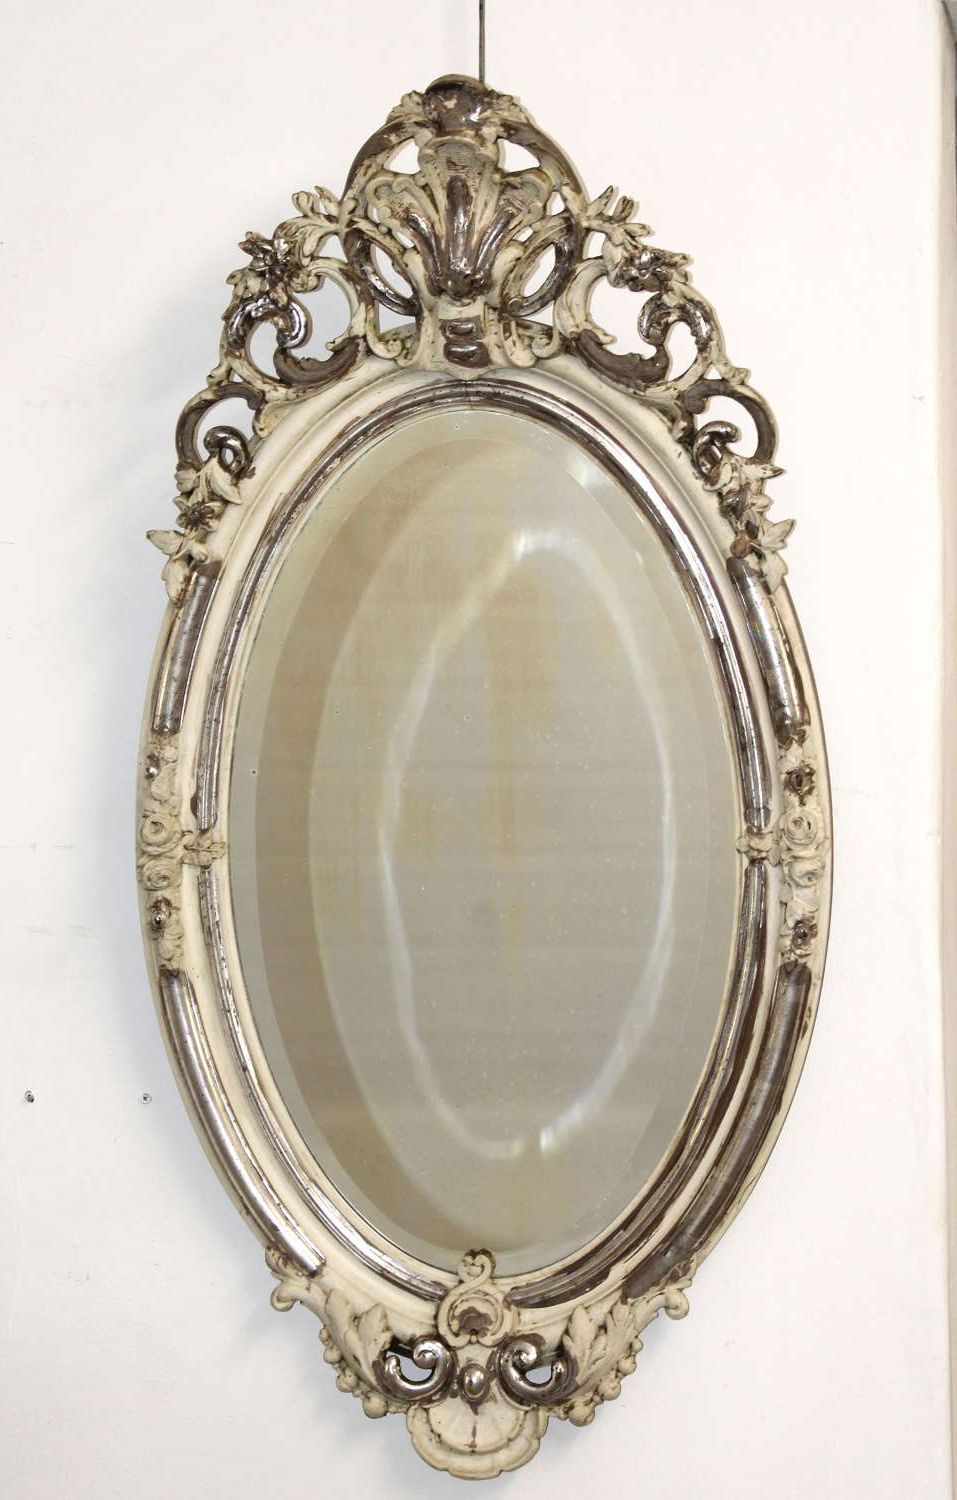 Vintage Silver And Cream Oval Mirror Pertaining To Preferred Antique Silver Oval Wall Mirrors (View 7 of 15)